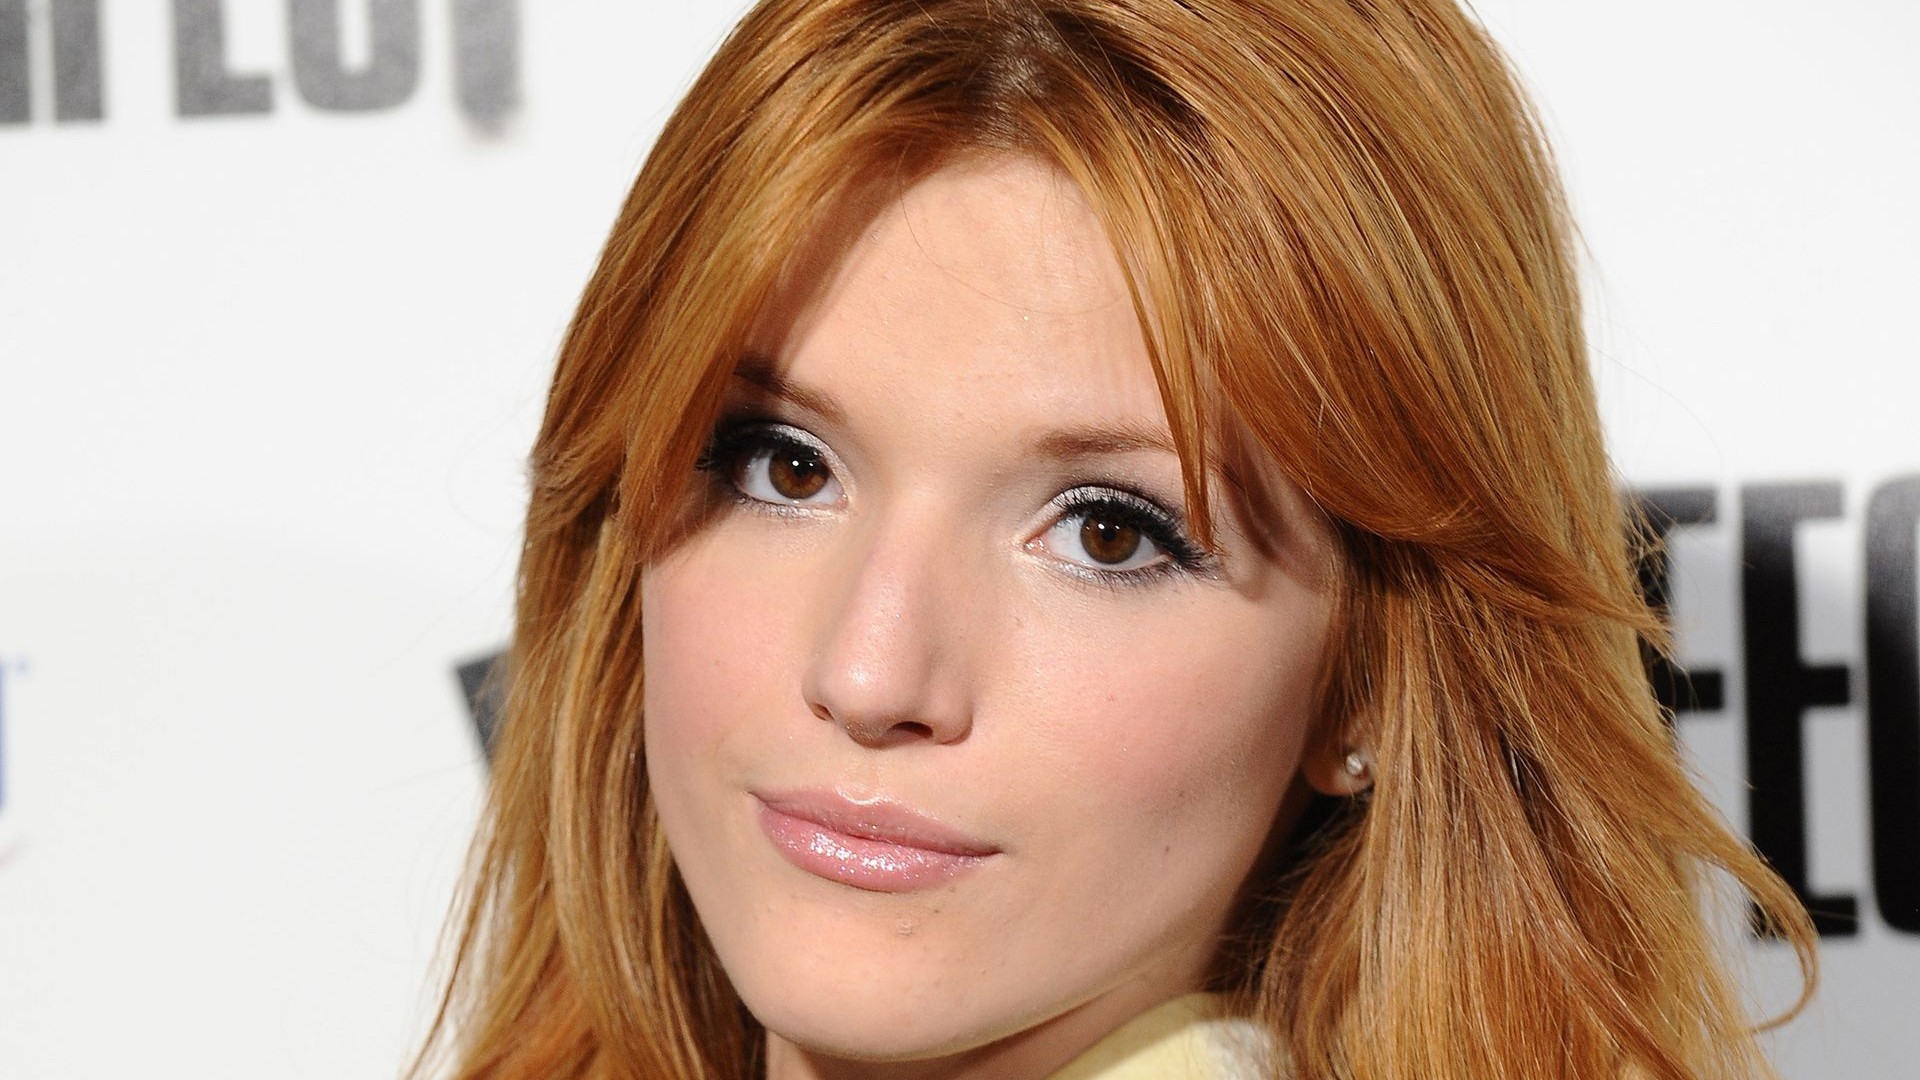 Bella Thorne Wallpaper Image Photos Pictures Background